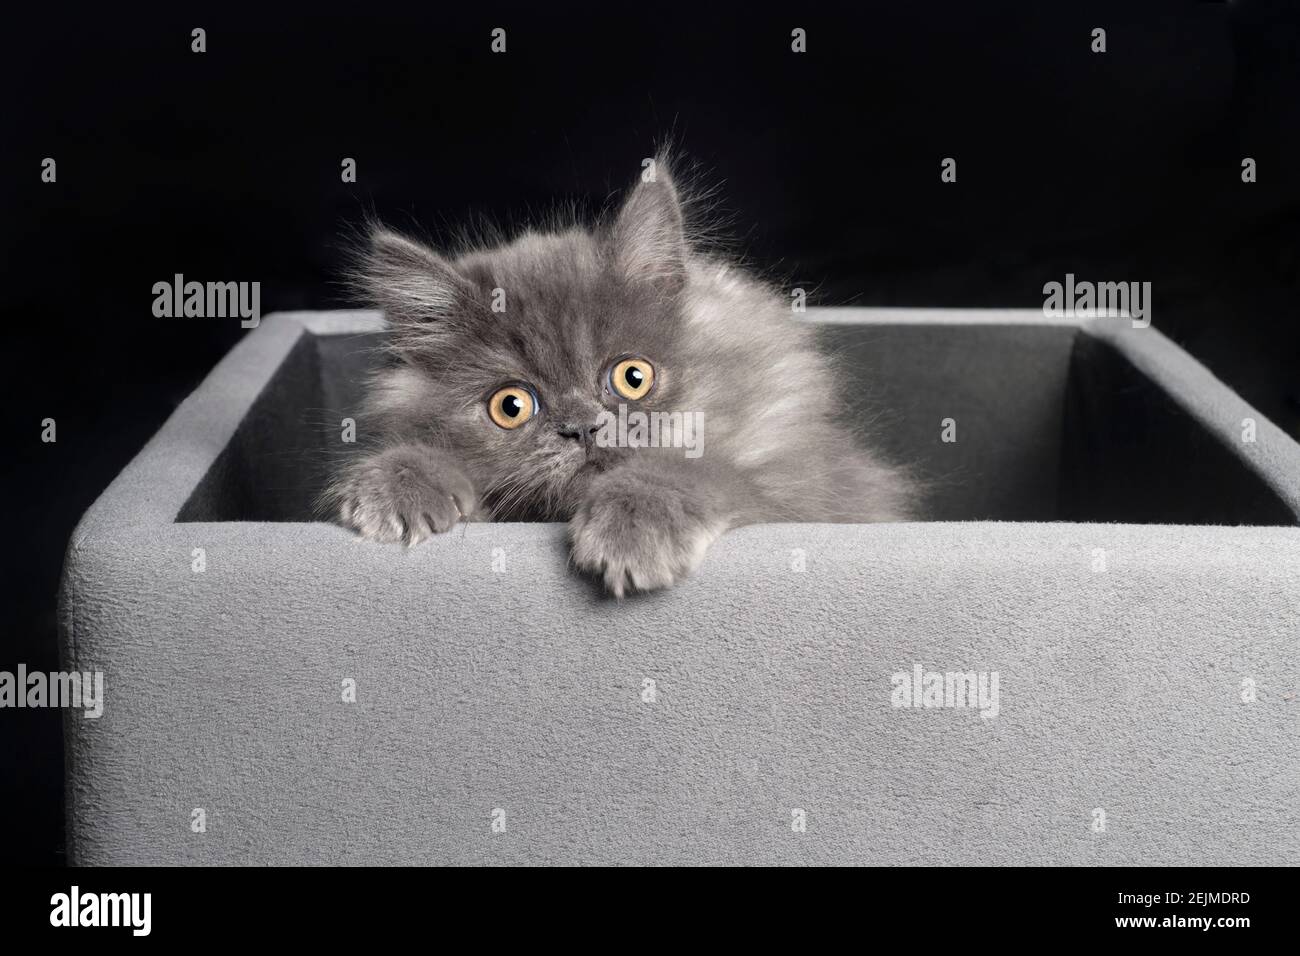 Cute grey kitten climbing out of a grey cube looking at the camera. Stock Photo